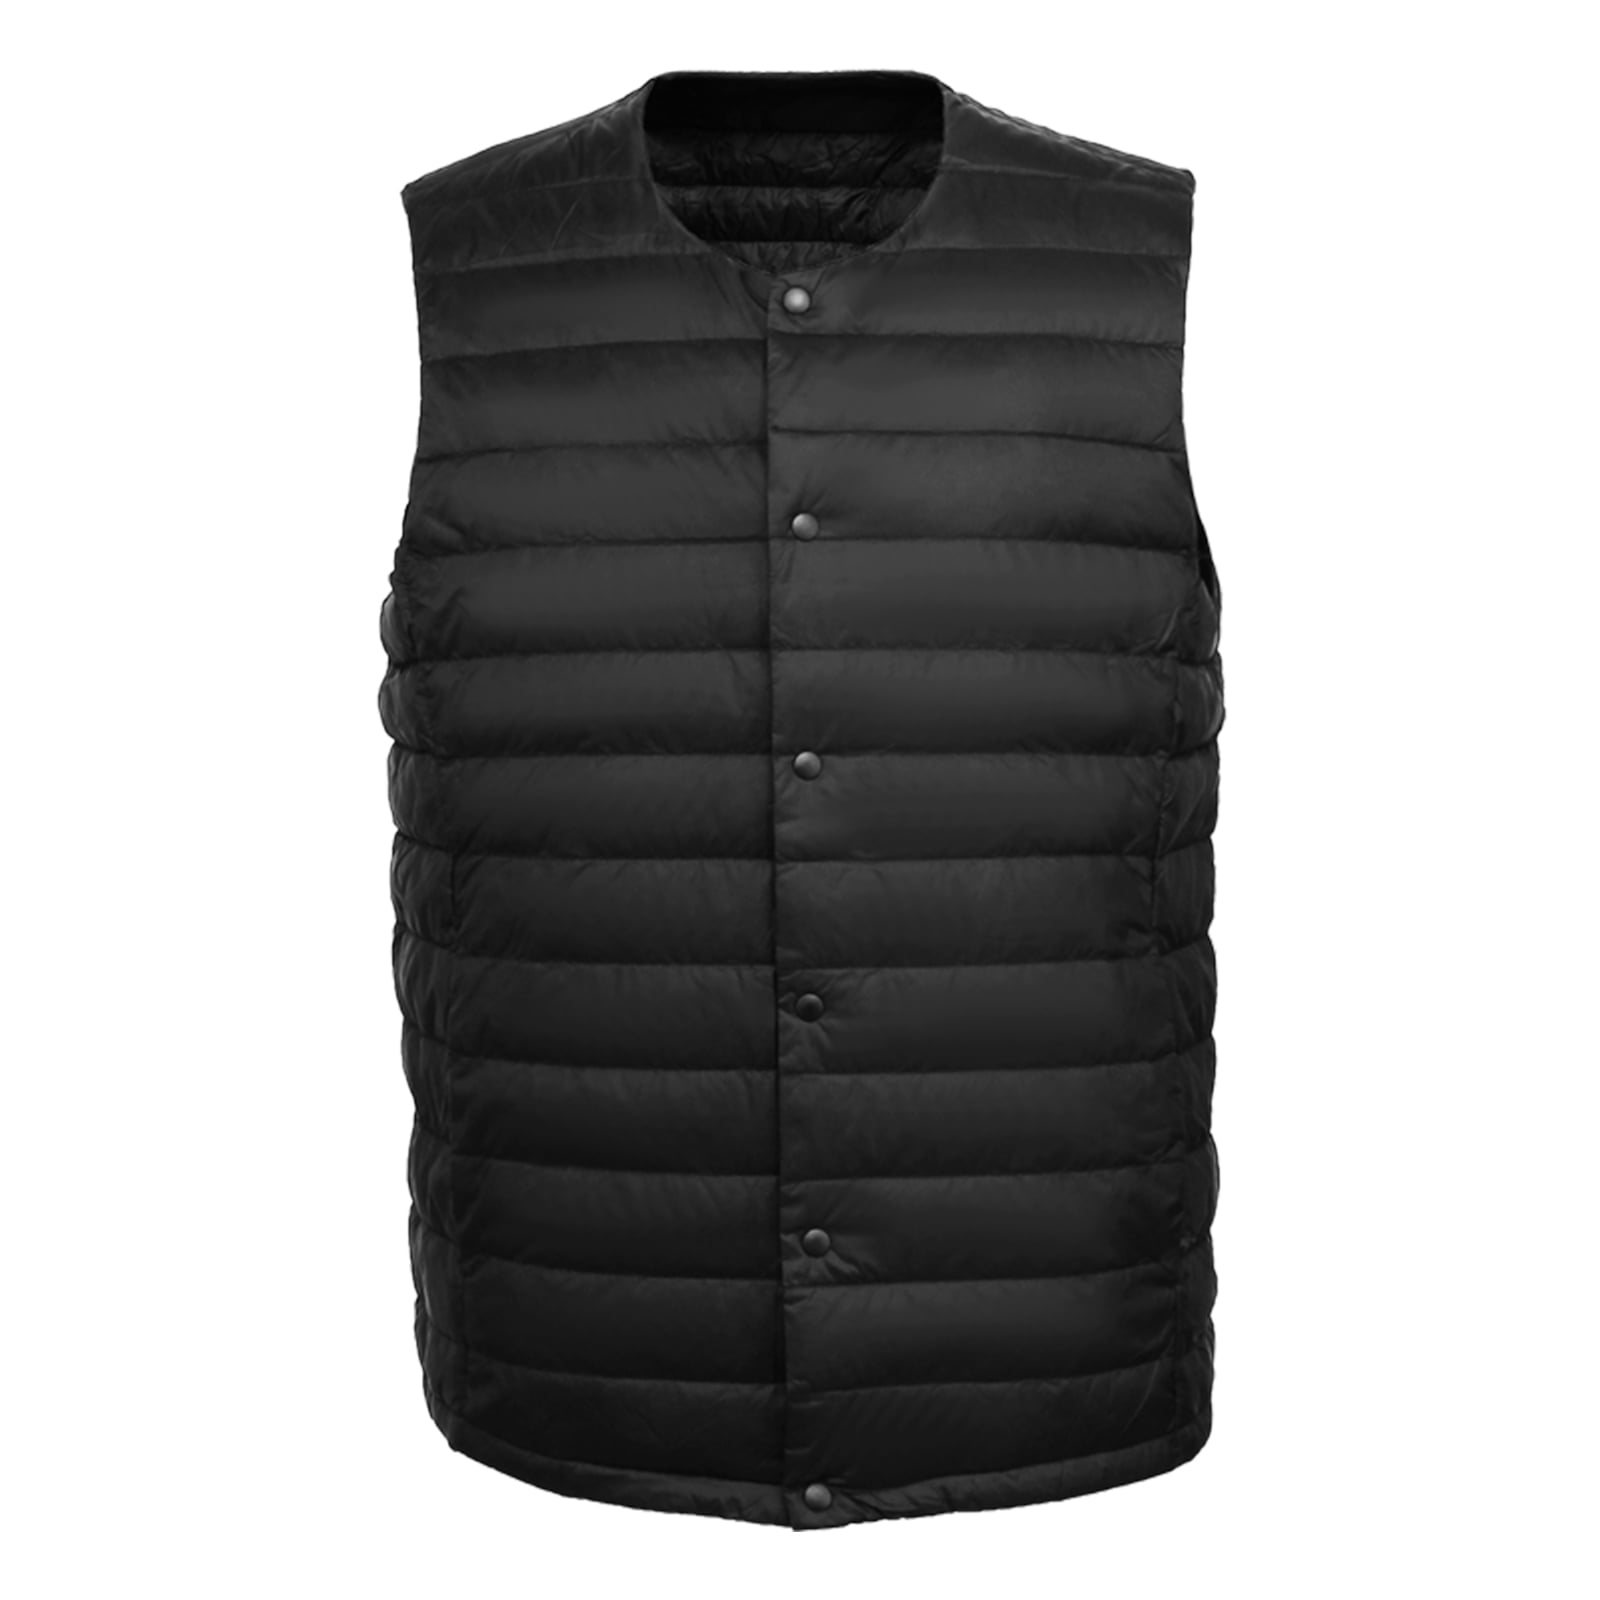 VBXOAE Men's Single-breasted Vest Gilet Fit Breathable Retro Casual  Streetwear Jacket(No ties and shirts) 